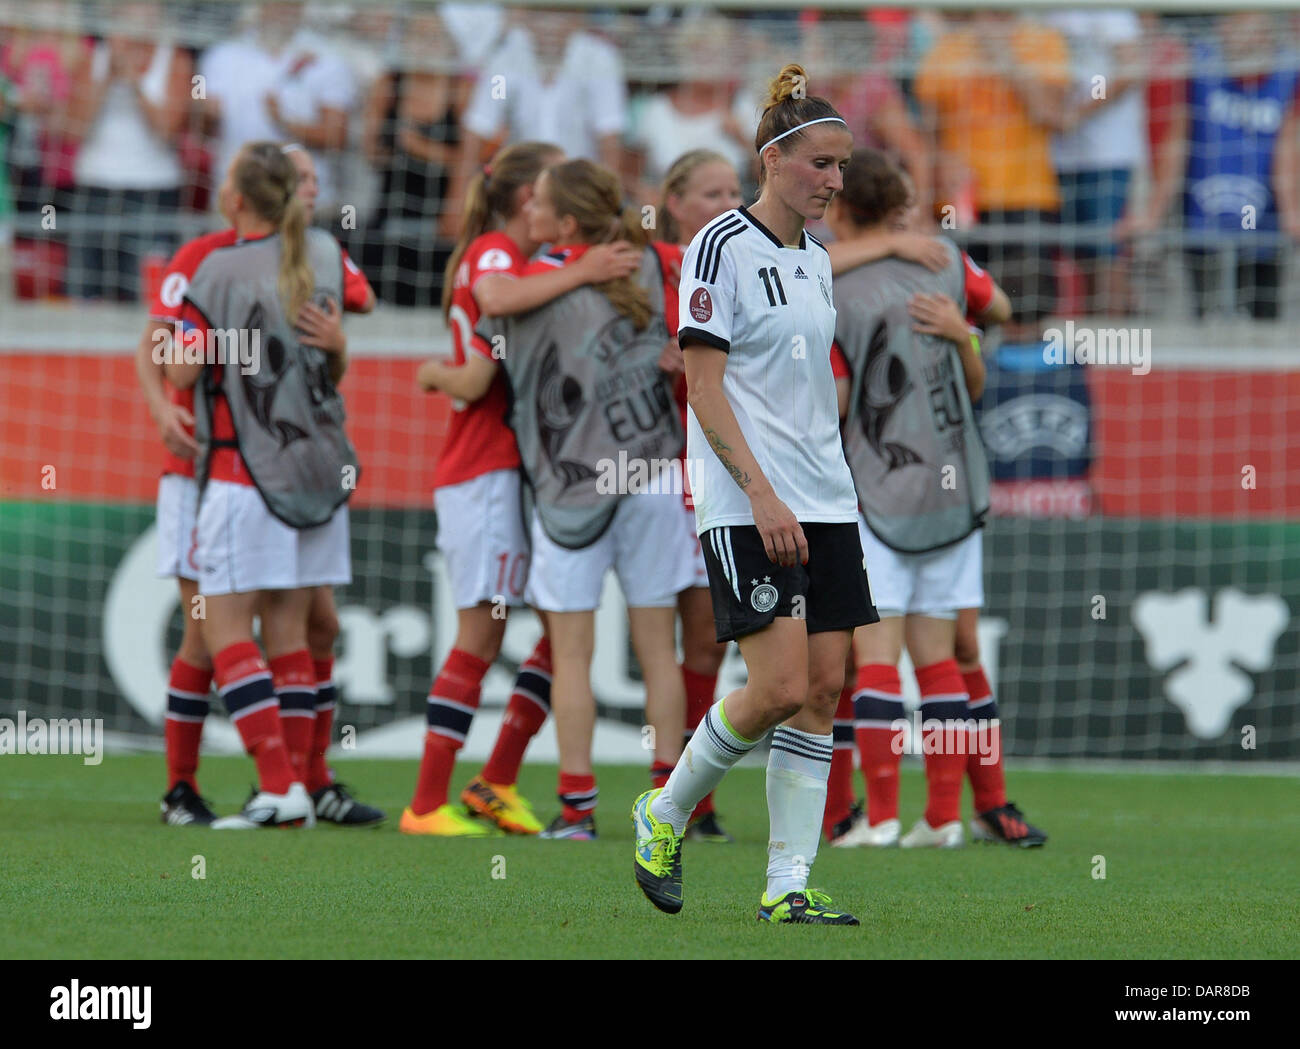 Anja Mittag of Germany leaves the field after the UEFA Women«s EURO 2013 Group B soccer match between Germany and Norway at the Kalmar Arena in Kalmar, Sweden, 17 July 2013. Norway defeated Germany 1-0. Photo: Carmen Jaspersen/dpa +++(c) dpa - Bildfunk+++ Stock Photo